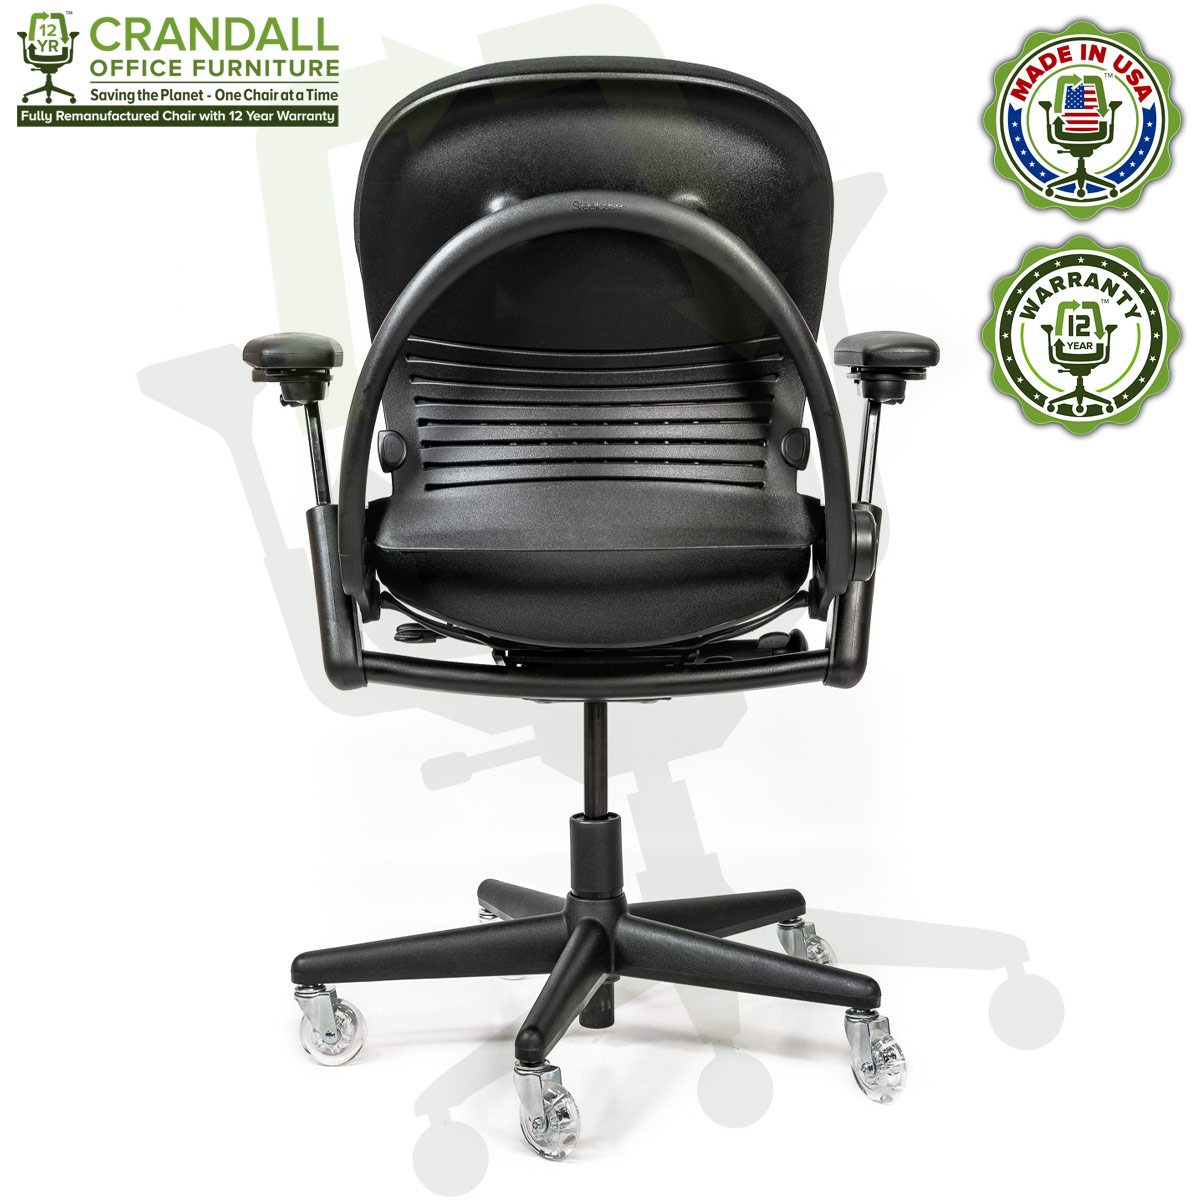 Crandall Office Furniture Remanufactured Steelcase V1 Leap Chair with 12 Year Warranty - Arch Back - 05